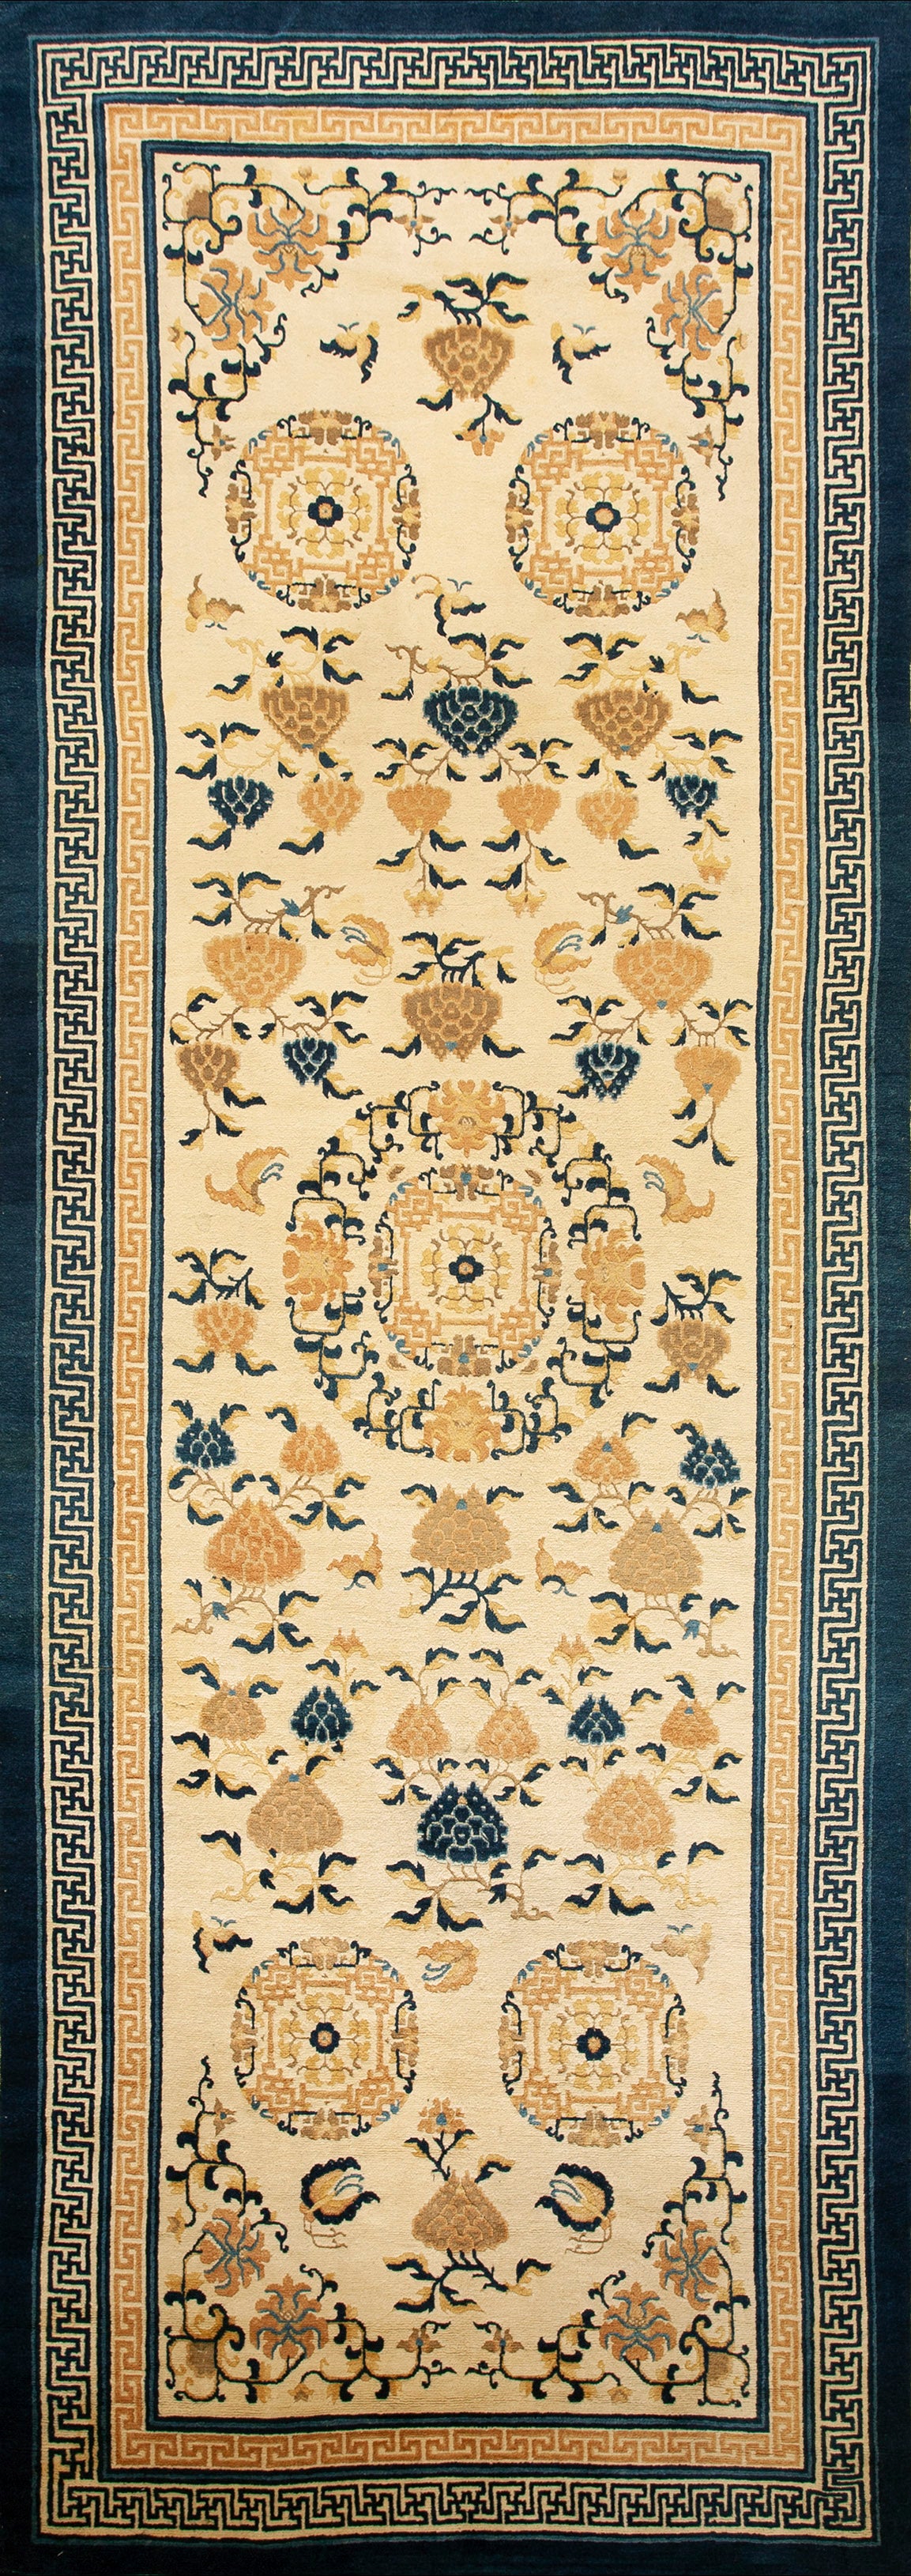 Mid 19th Century Chinese Ningxia Gallery Carpet (5'8" x 16'6" - 173 x 473 cm) For Sale